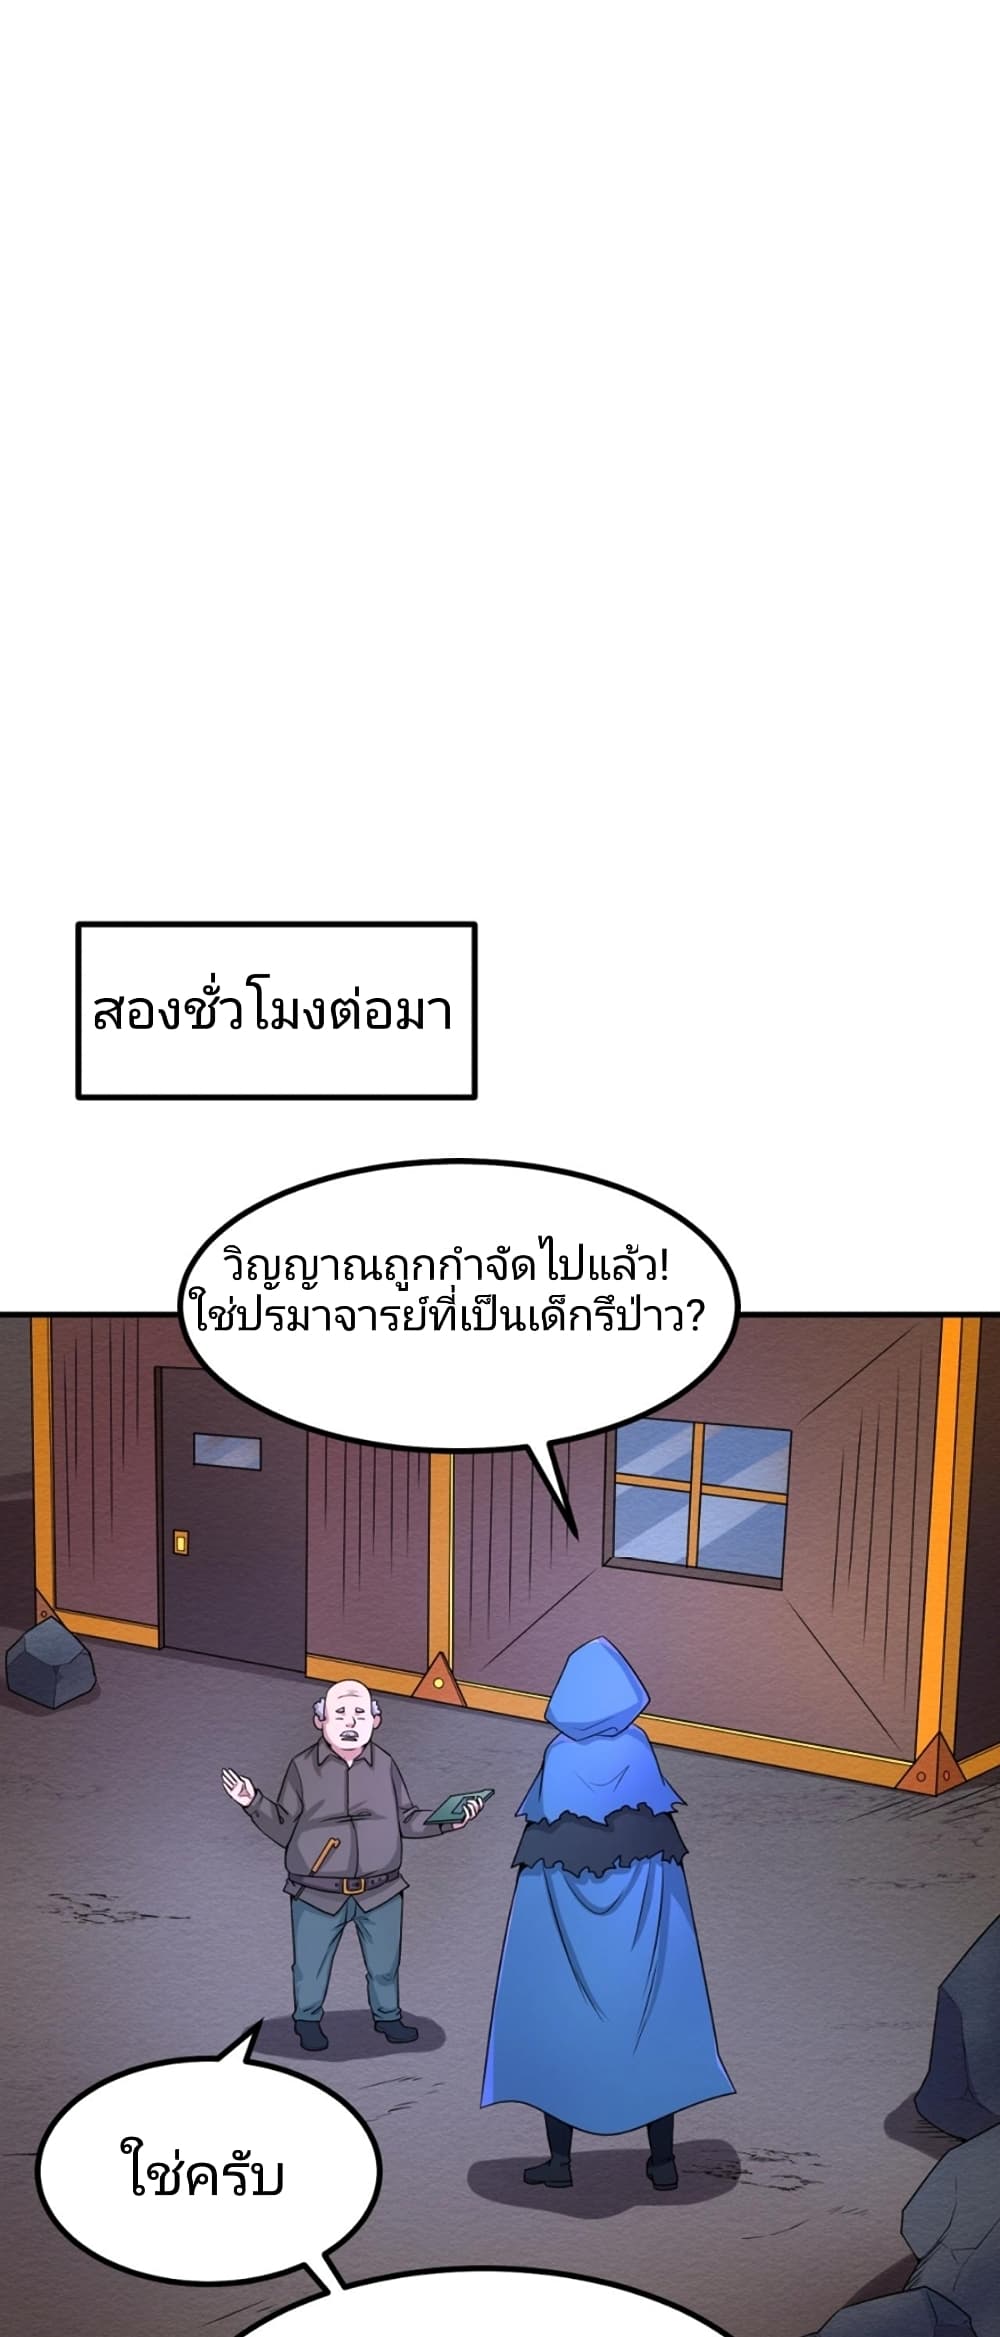 The Age of Ghost Spirits à¸à¸­à¸à¸à¸µà¹ 9 (36)